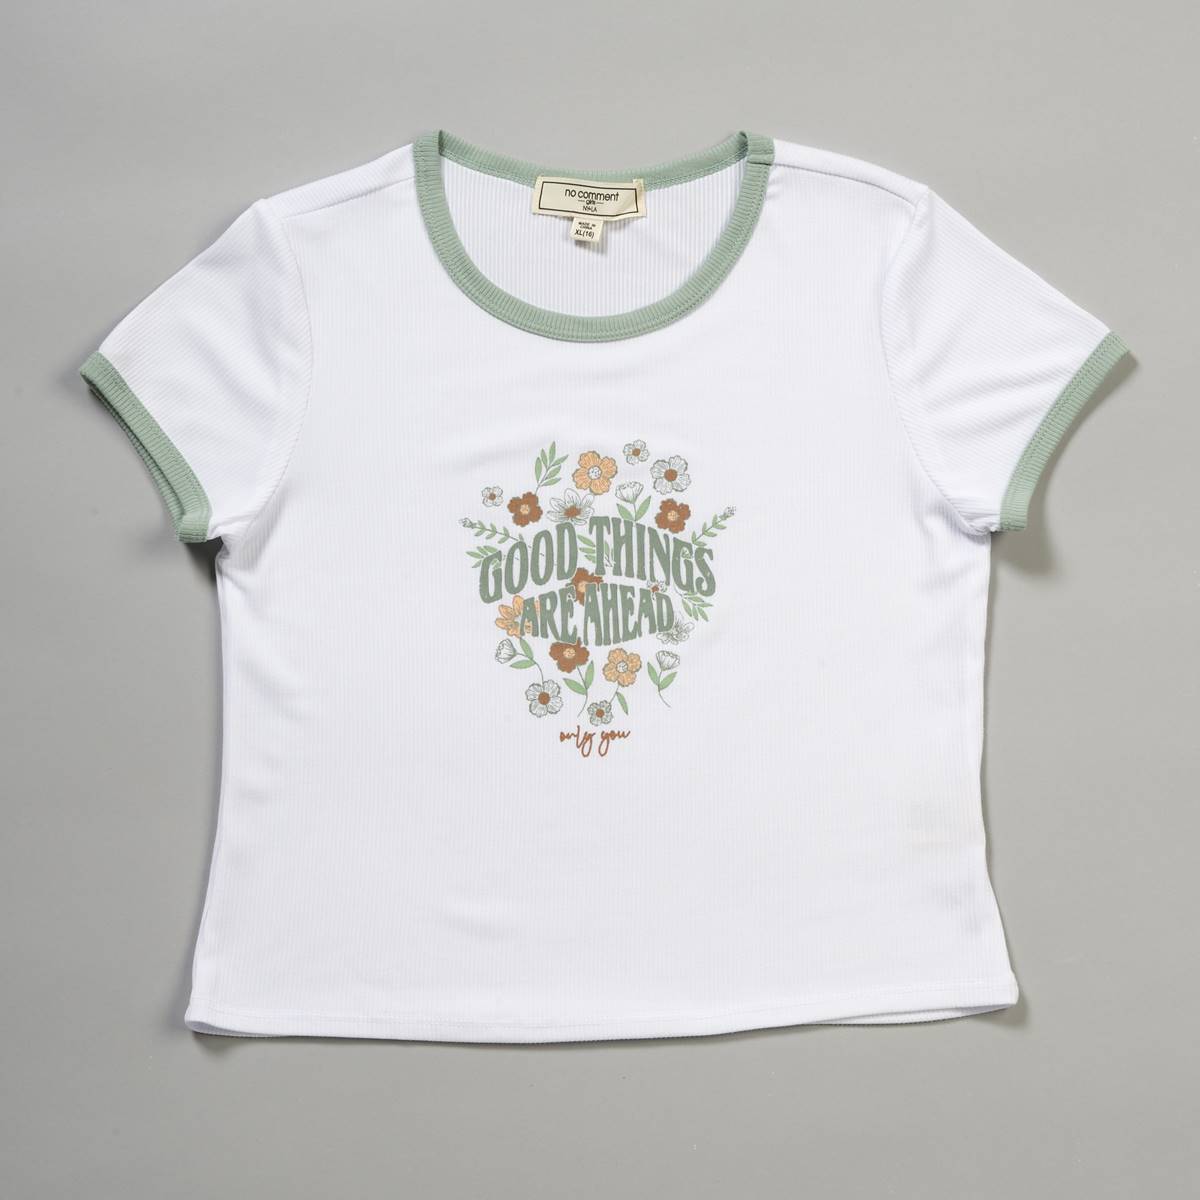 Girls (7-16) No Comment Good Things Ribbed Short Sleeve Tee